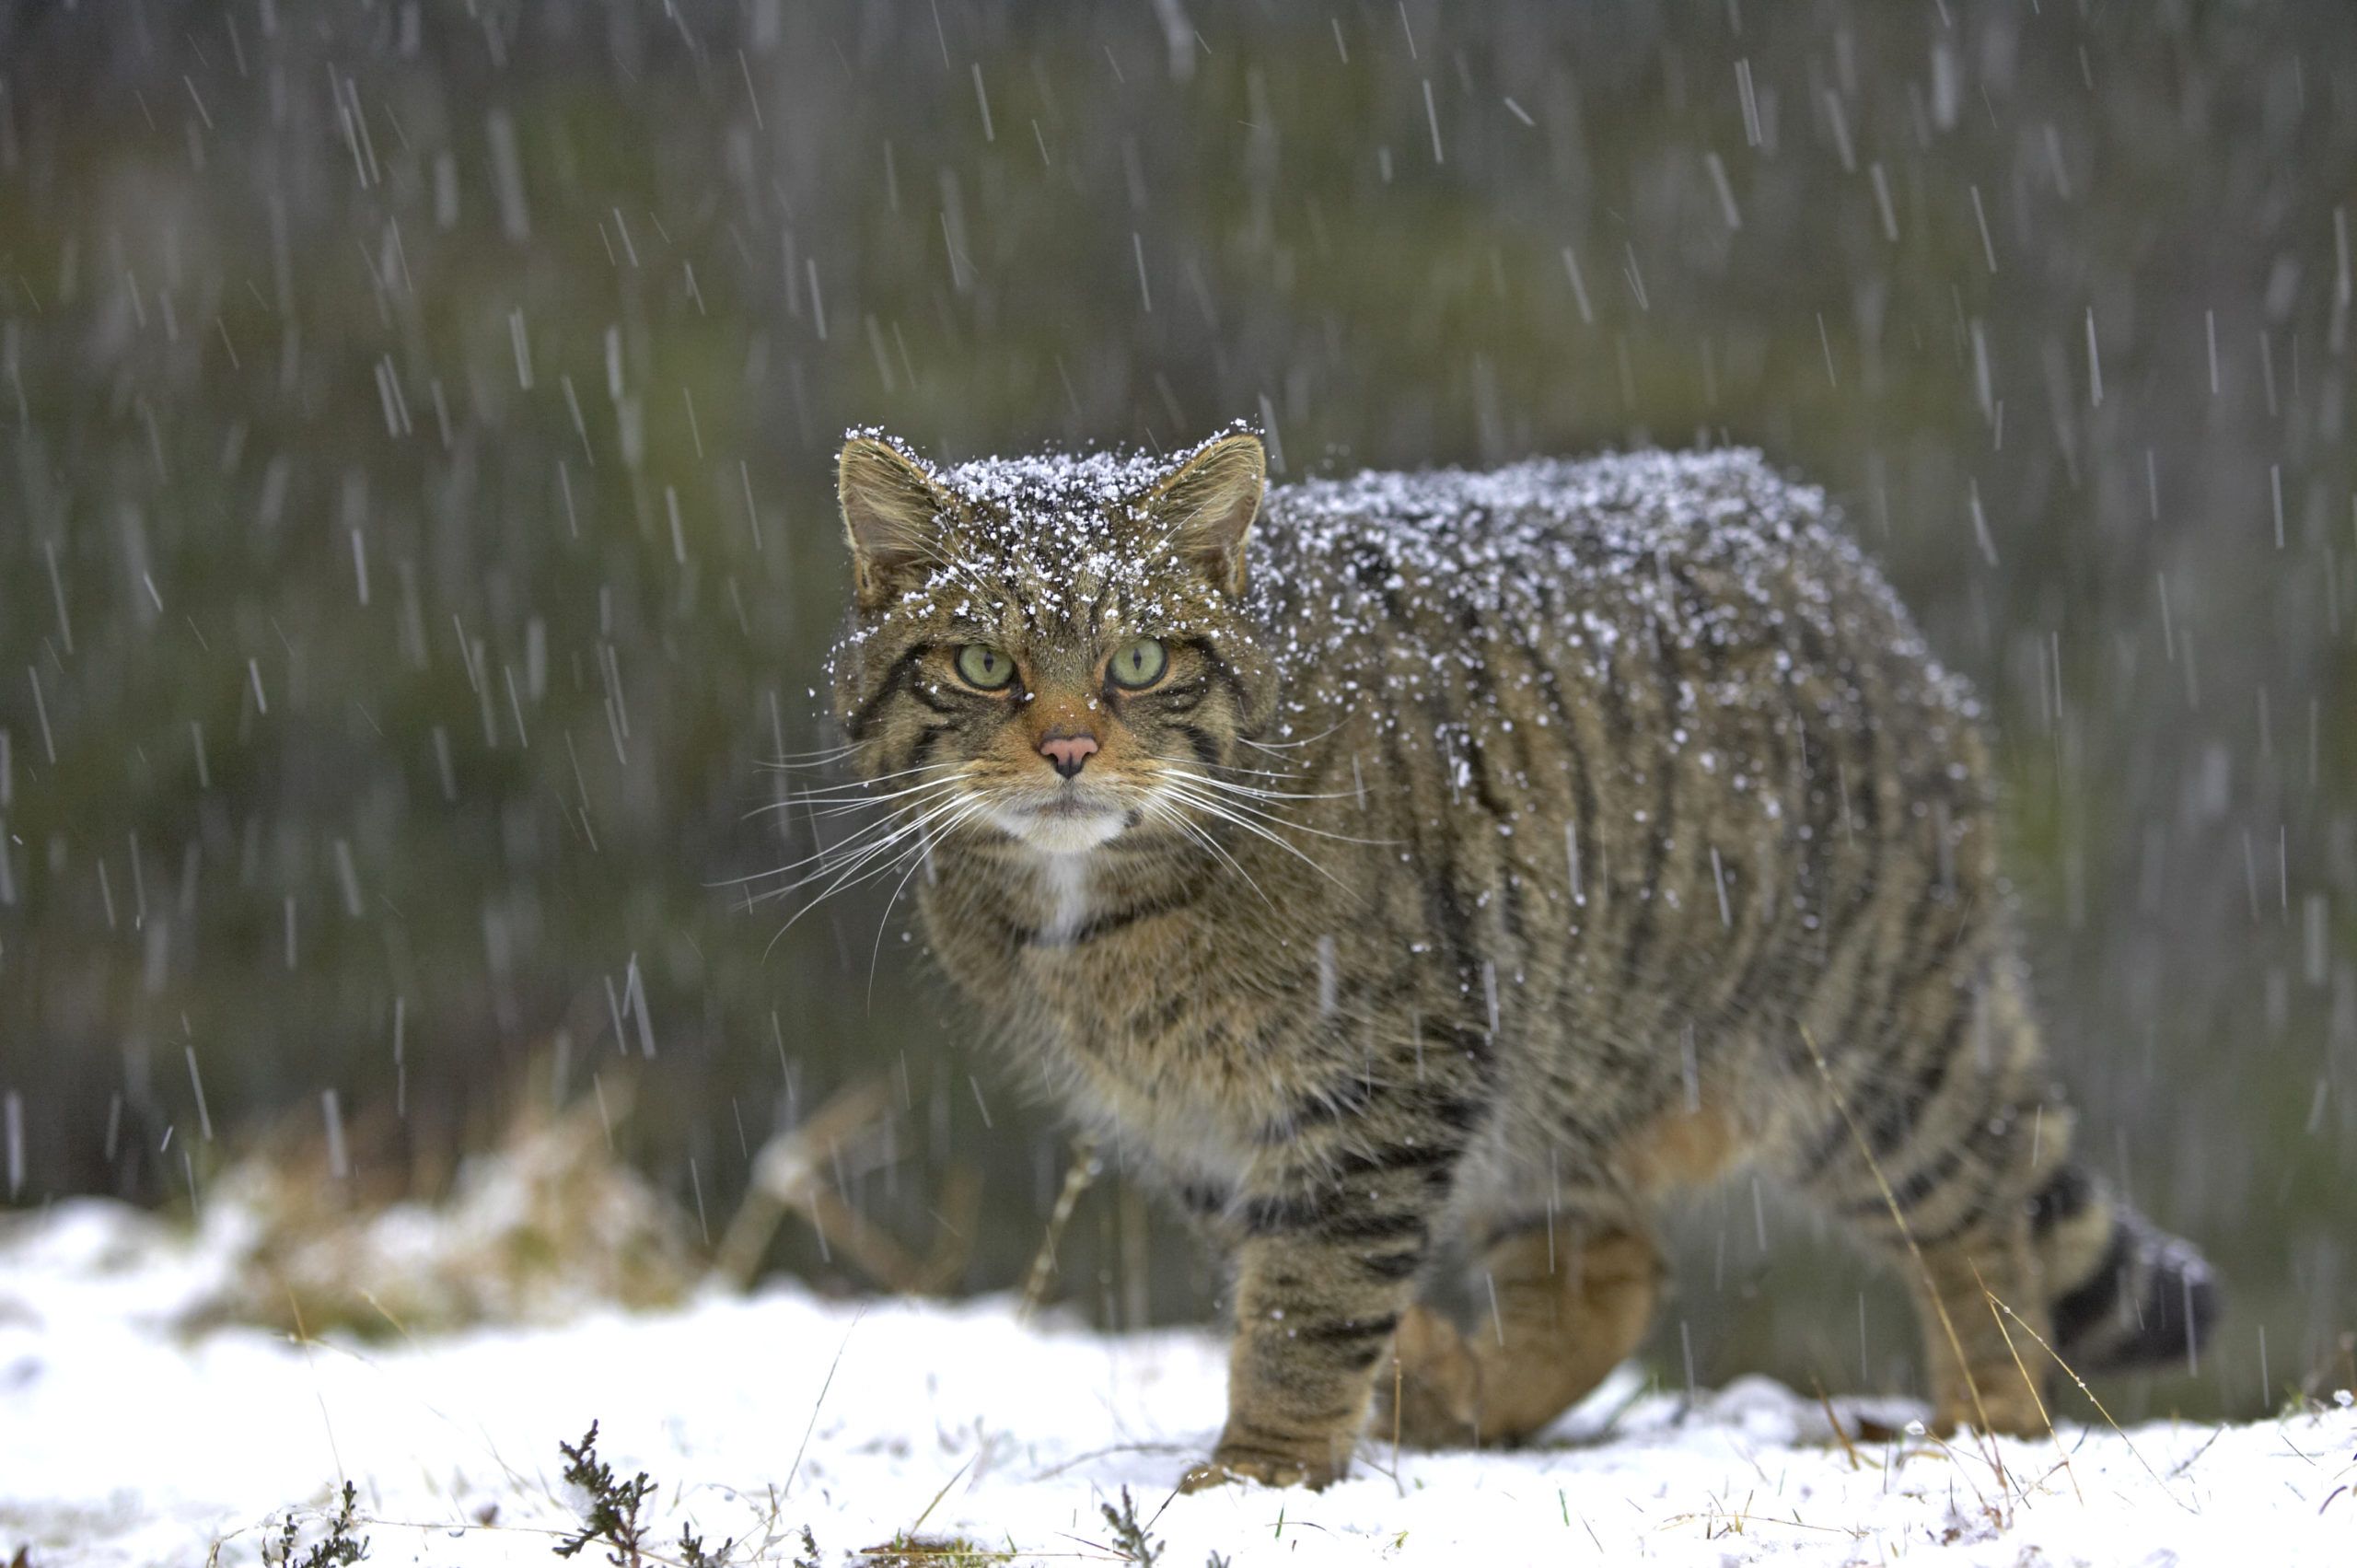 Clinging on by a claw saving wildcats from extinction